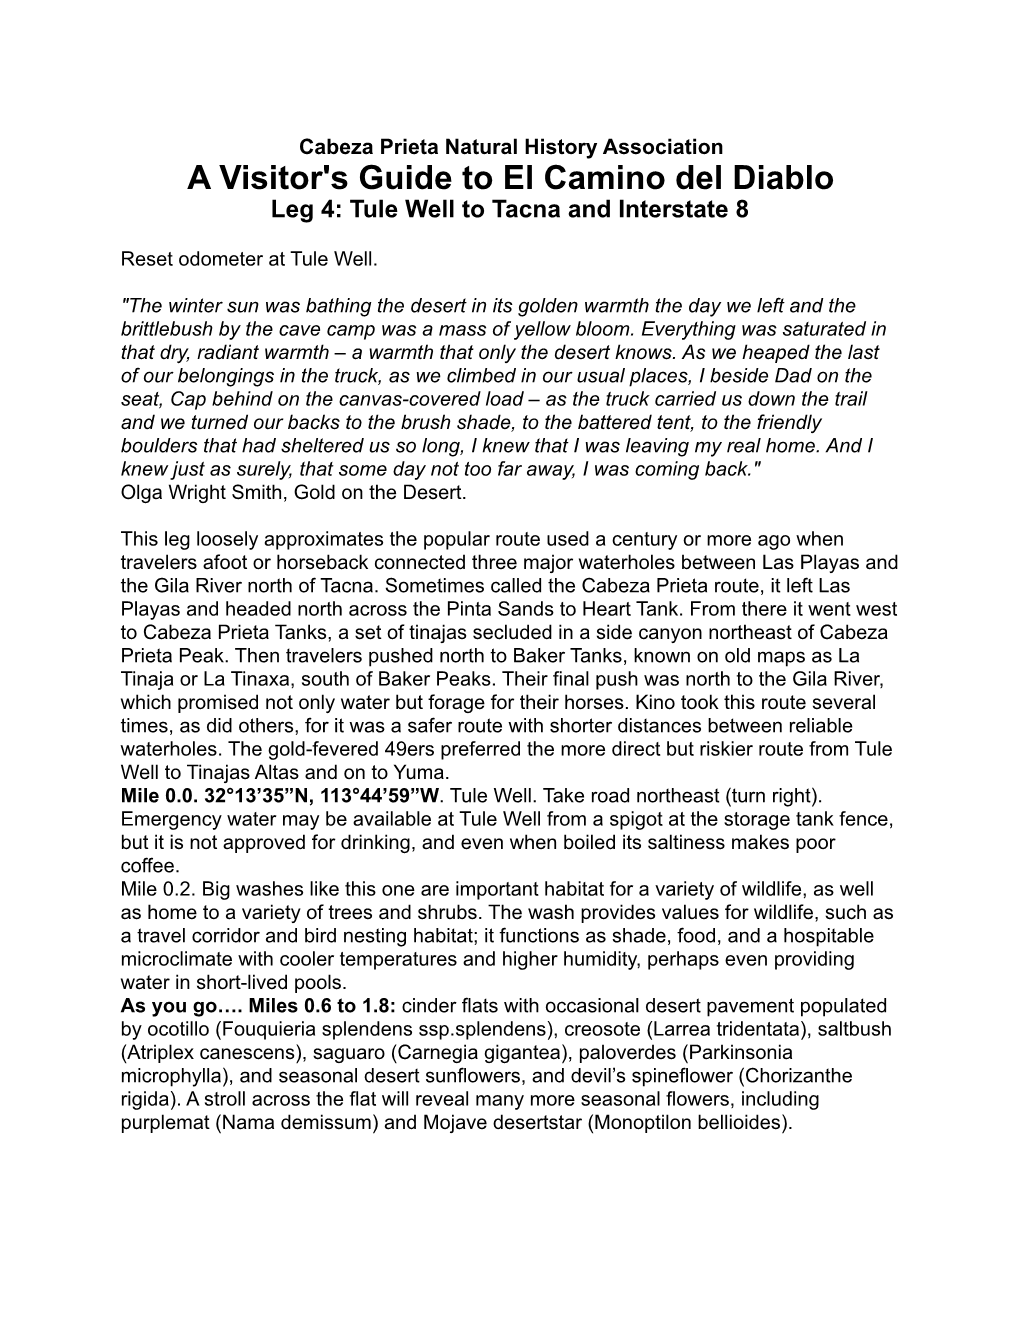 A Visitor's Guide to El Camino Del Diablo Leg 4: Tule Well to Tacna and Interstate 8